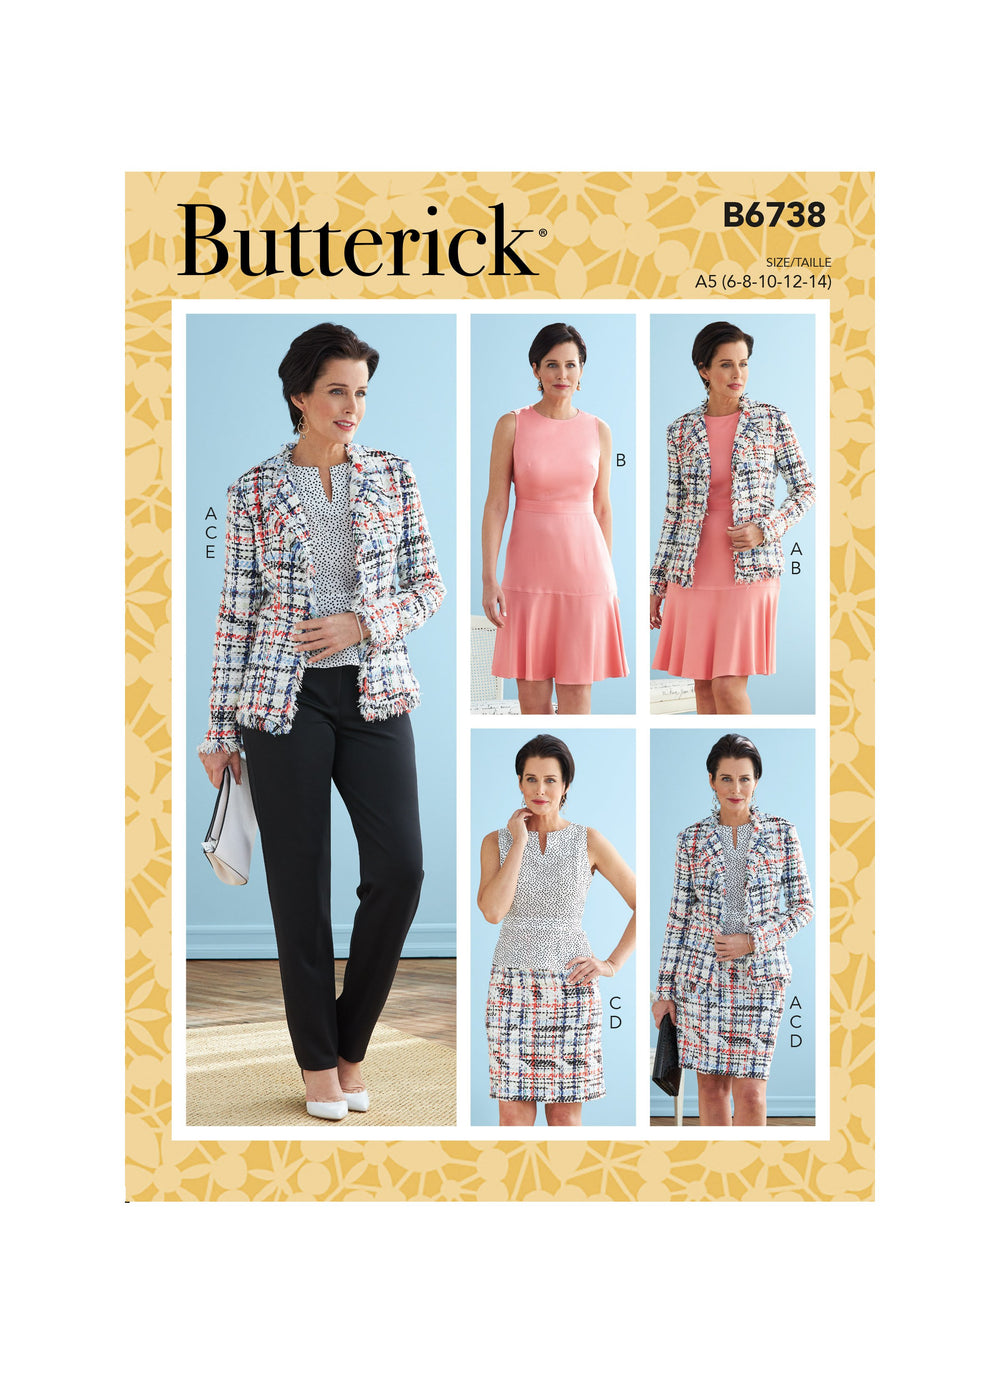 Butterick Sewing Pattern 6738 Jacket, Dress, Top, Skirt and Pants from Jaycotts Sewing Supplies